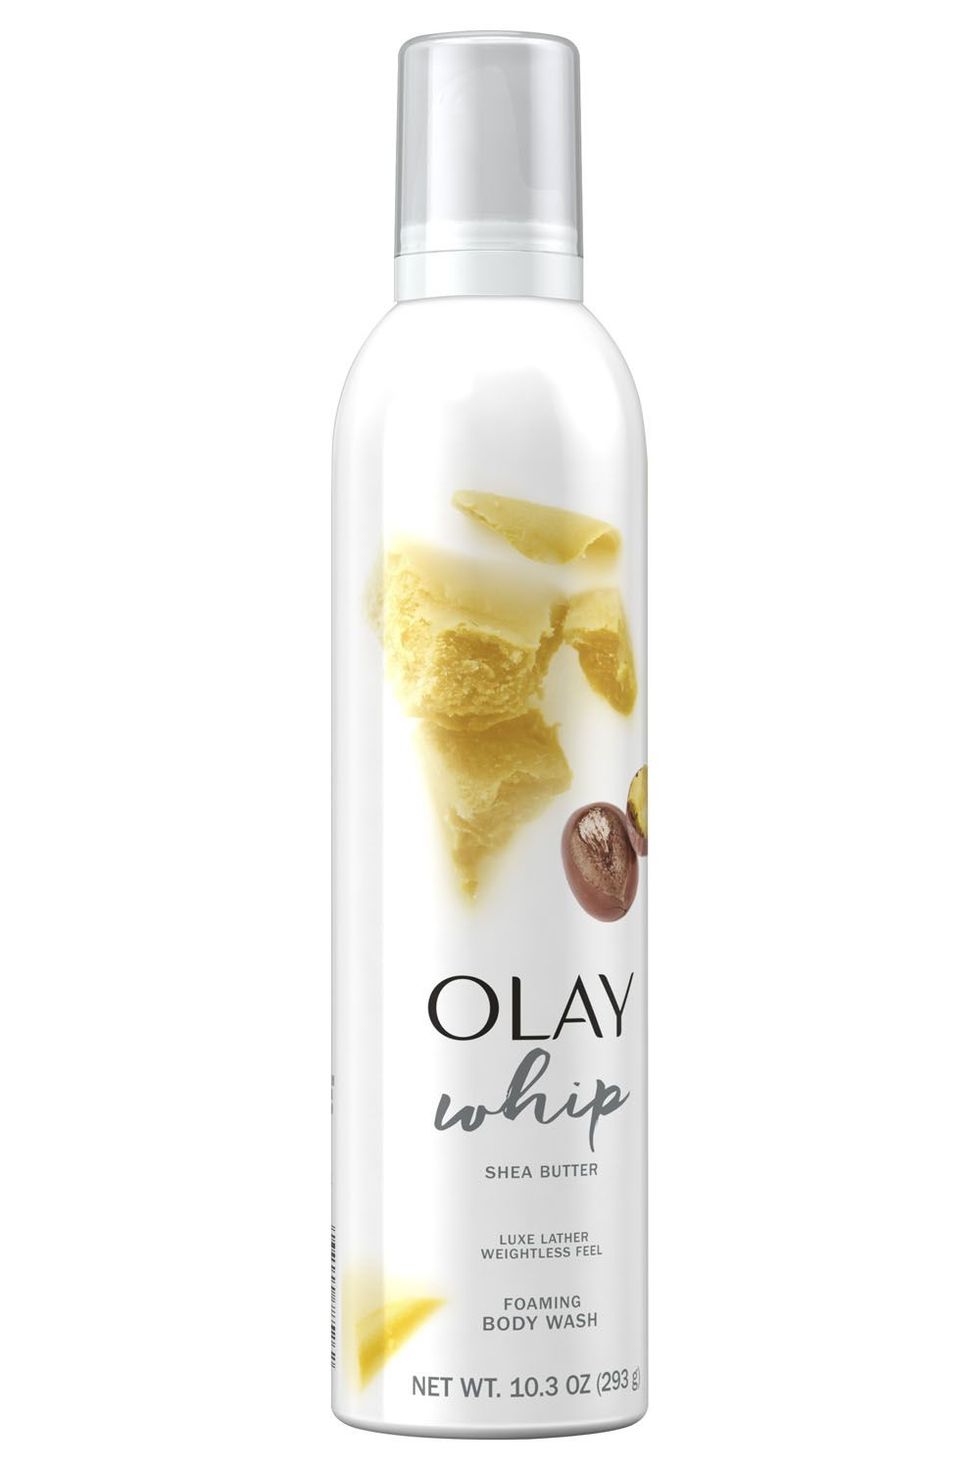 Olay Shea Butter Scent Foaming Whip Body Wash